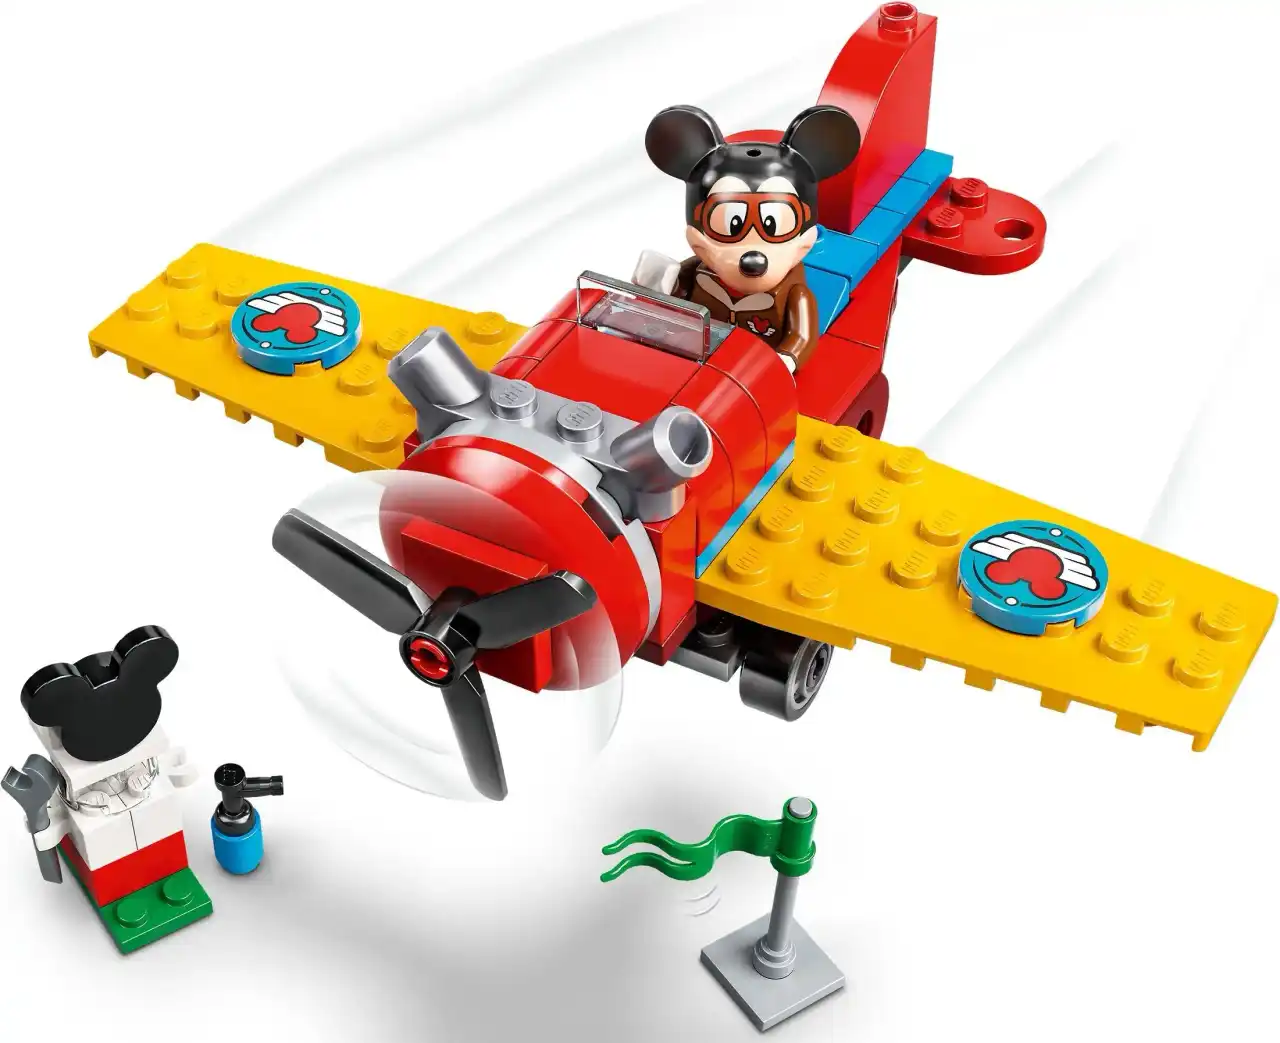 10772 - Mickey Mouse's Propeller Plane